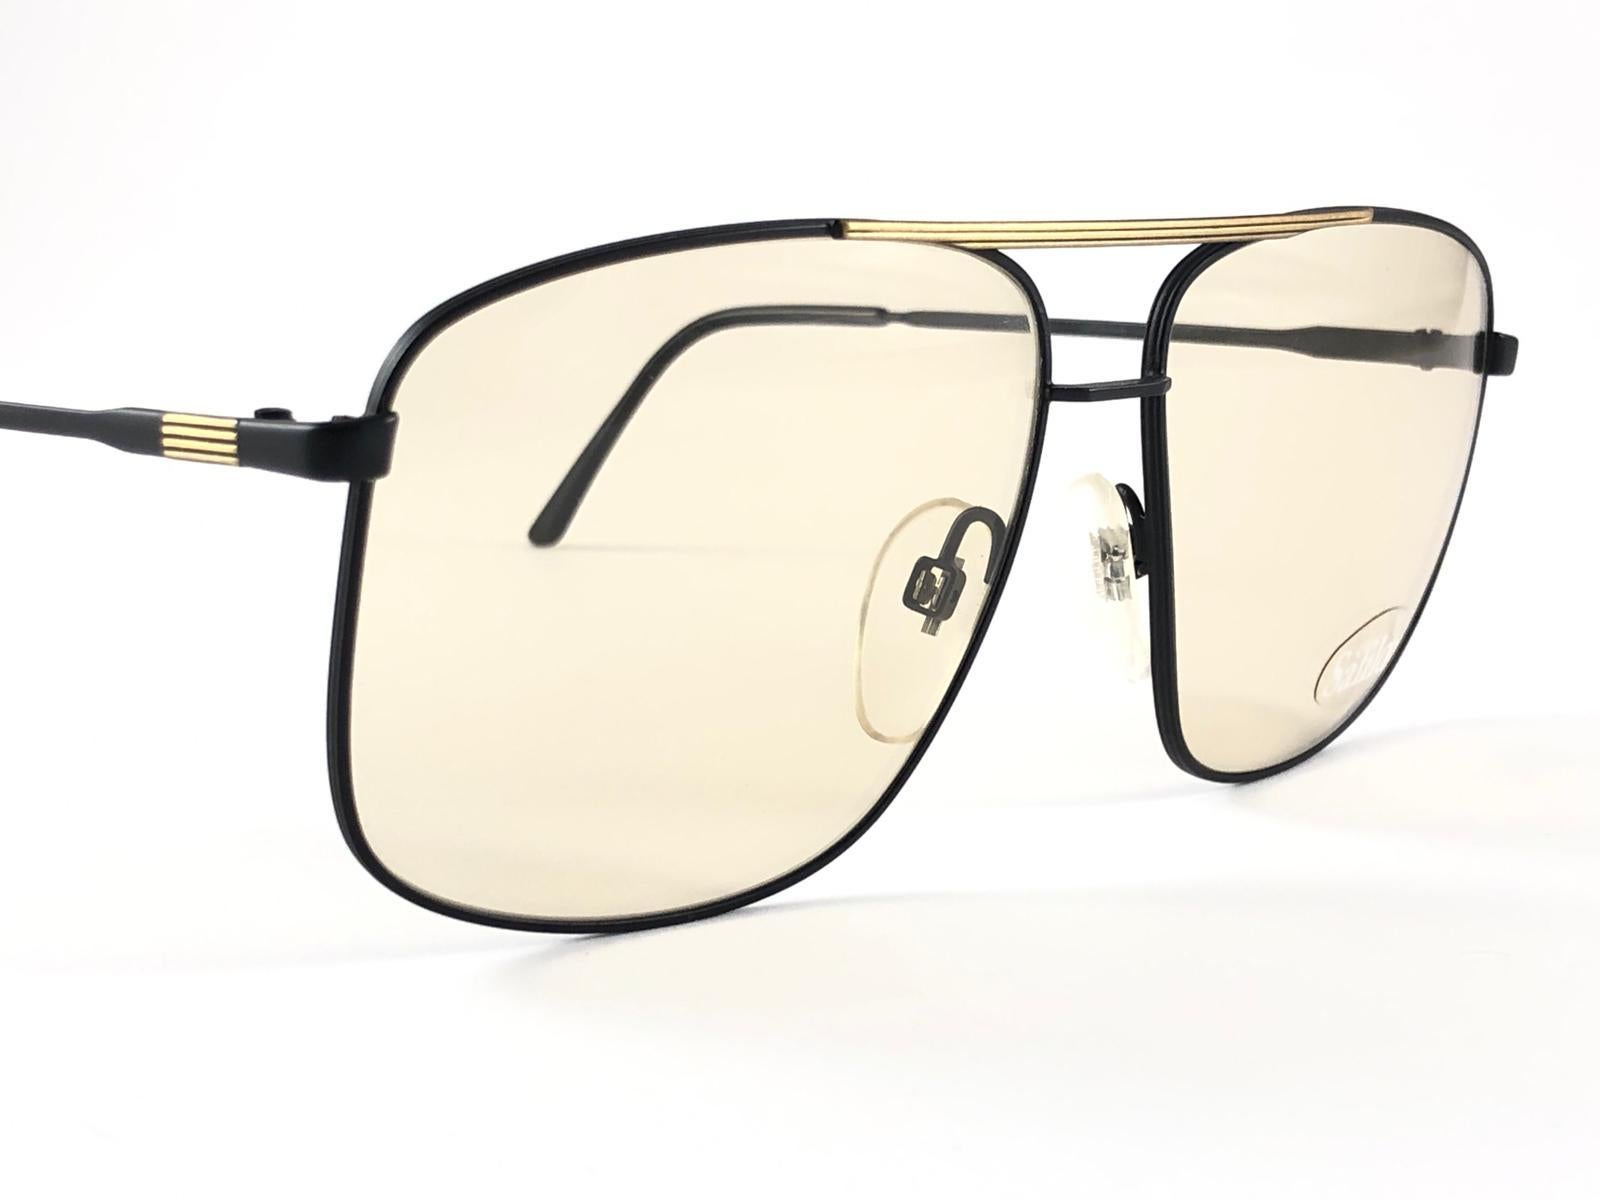 New Vintage Safilo, a balanced combination of Italian craftsmanship, design, functionality and striking aesthetics, this model showcases a Black Mate with Gold Accents frame holding a spotless light lenses.

New, never worn or displayed.
Made in